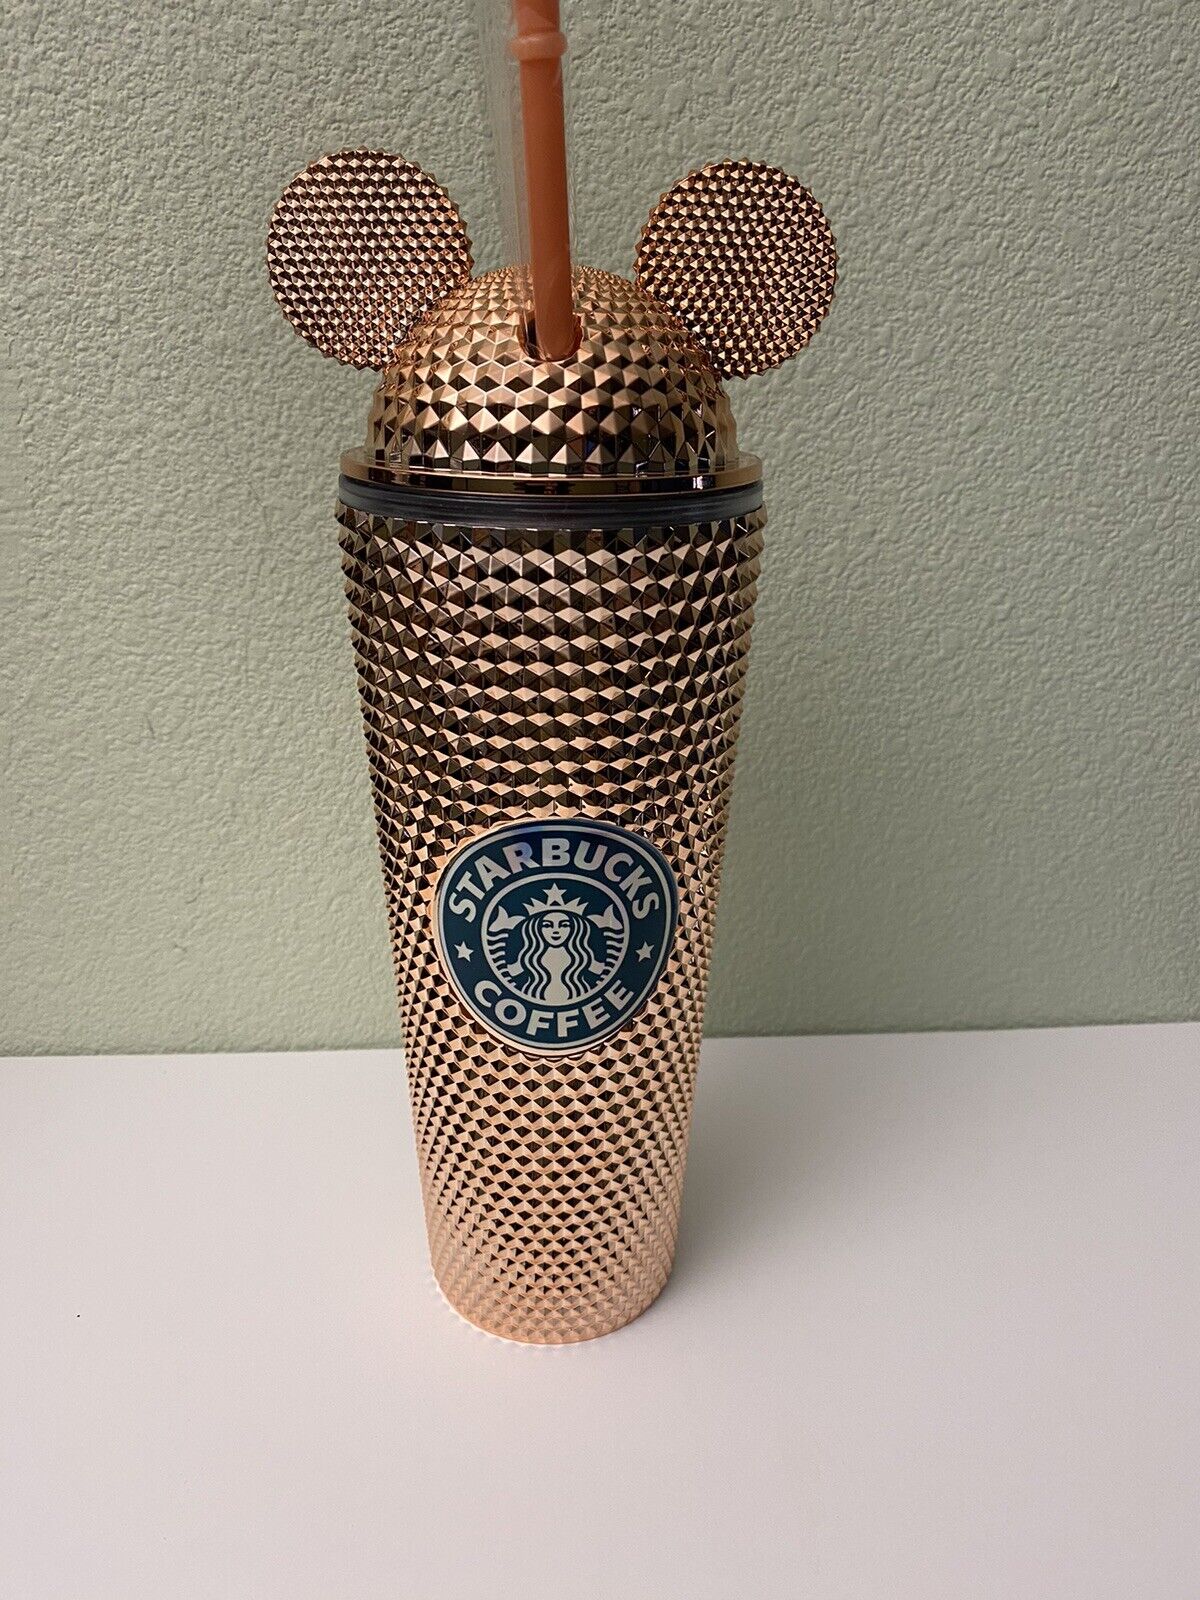 Starbucks Disney Rose Gold Tumbler with Mickey Mouse Ears Lid New